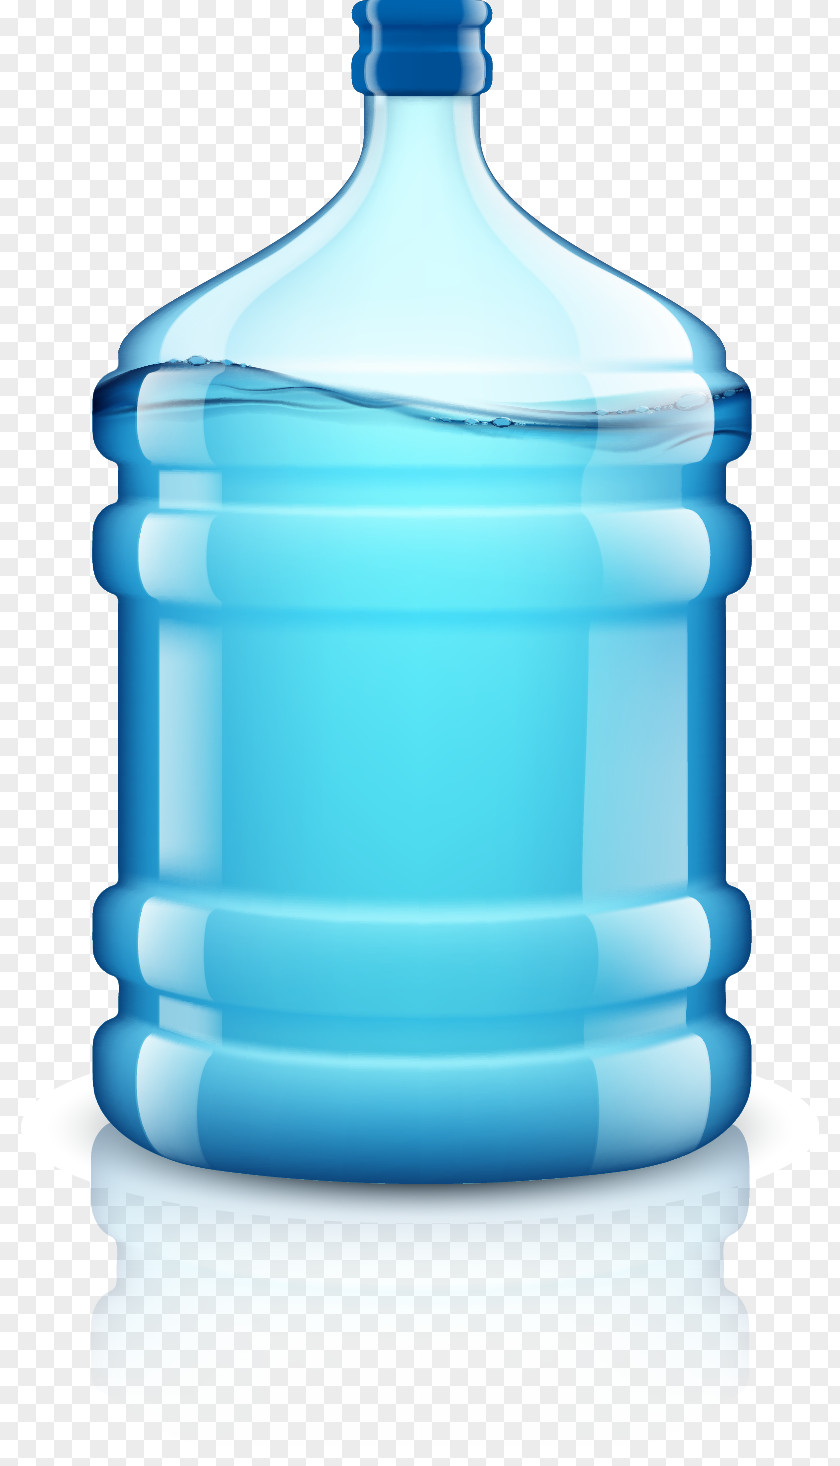 A Bucket Of Water Drinking Bottle Euclidean Vector Plastic PNG